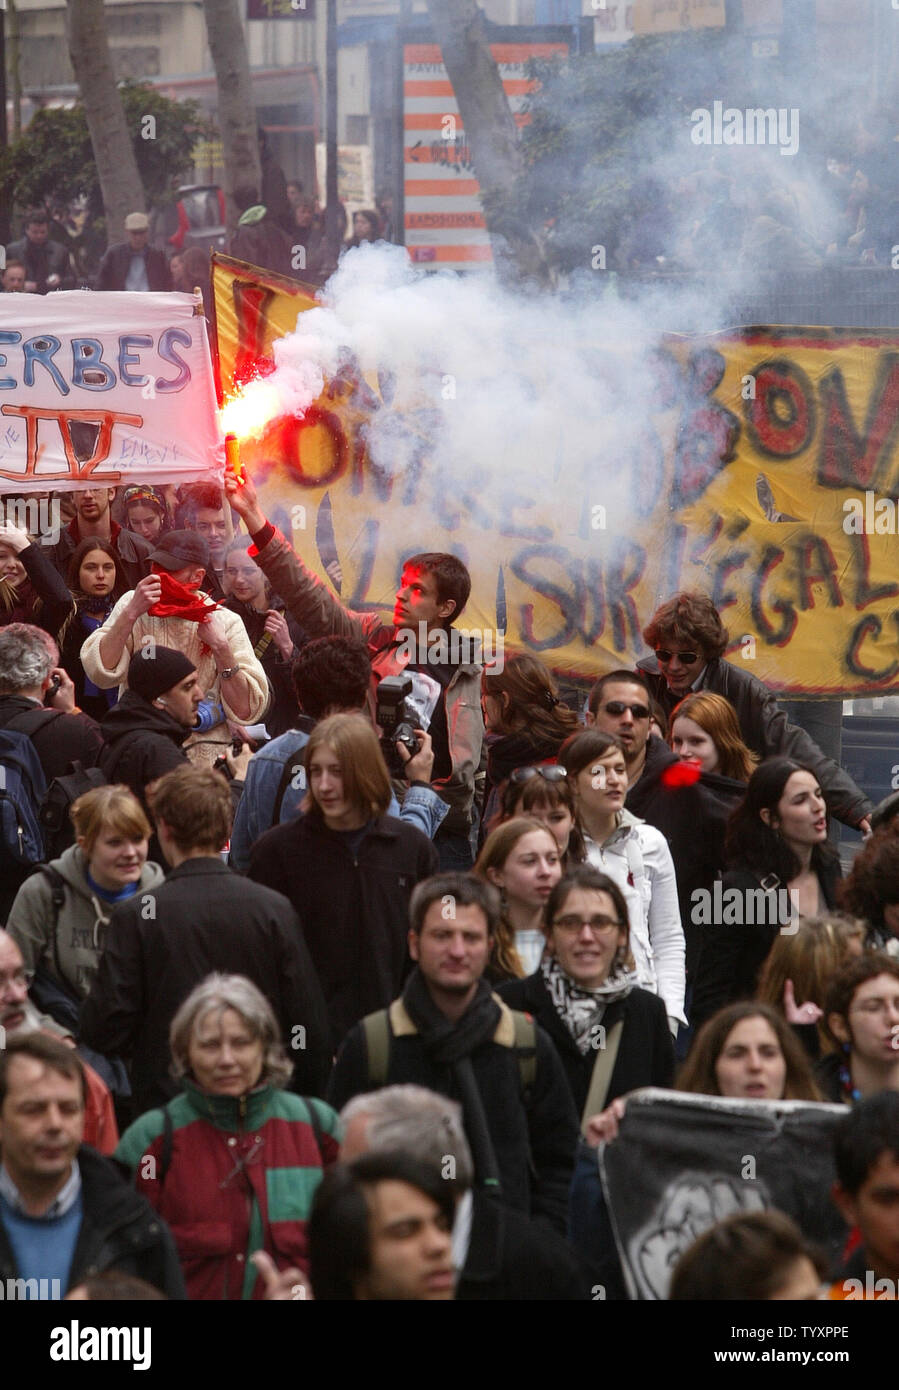 A French student holds a flare during a protest march along one of Paris' main avenues April 11, 2006. Hundreds of students, emboldened by President Jacques Chirac's cave-in on the First Employment Contract (CPE), went ahead with a pre-planned demonstration in a bid to get rid of other government labor reforms.  (UPI Photo/Eco Clement) Stock Photo